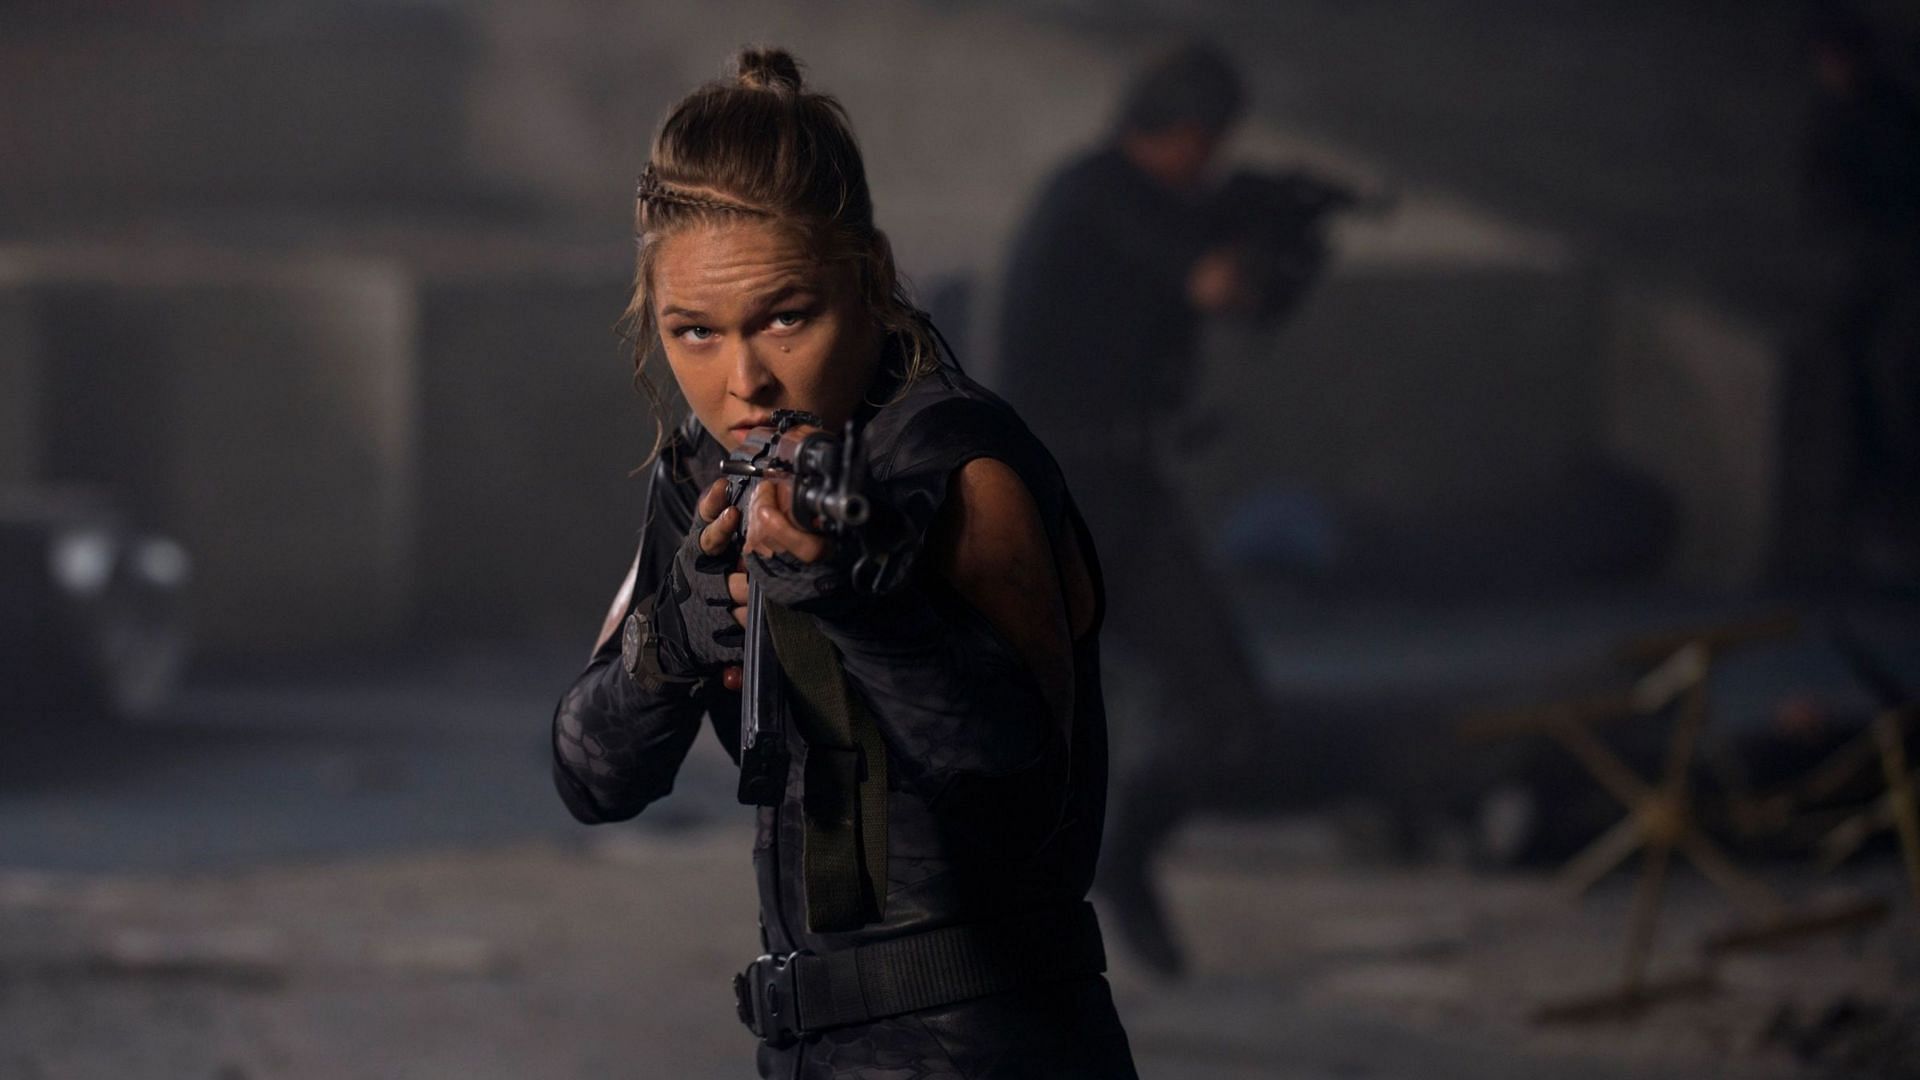 Ronda Rousey appeared in several movies and TV shows